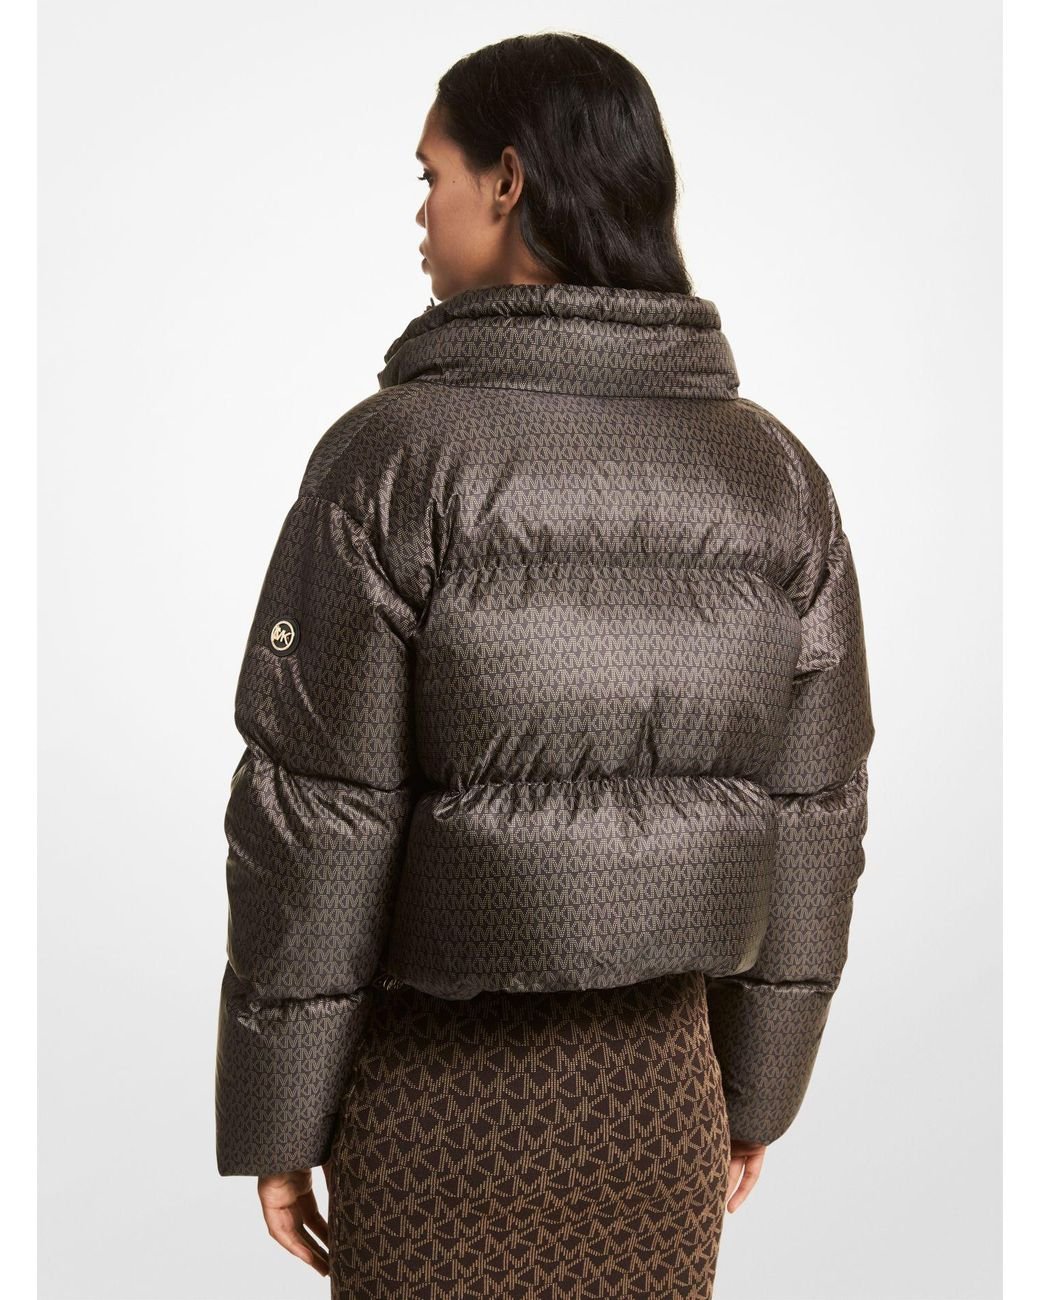 Michael Kors Cropped Logo Quilted Puffer Jacket in Brown | Lyst